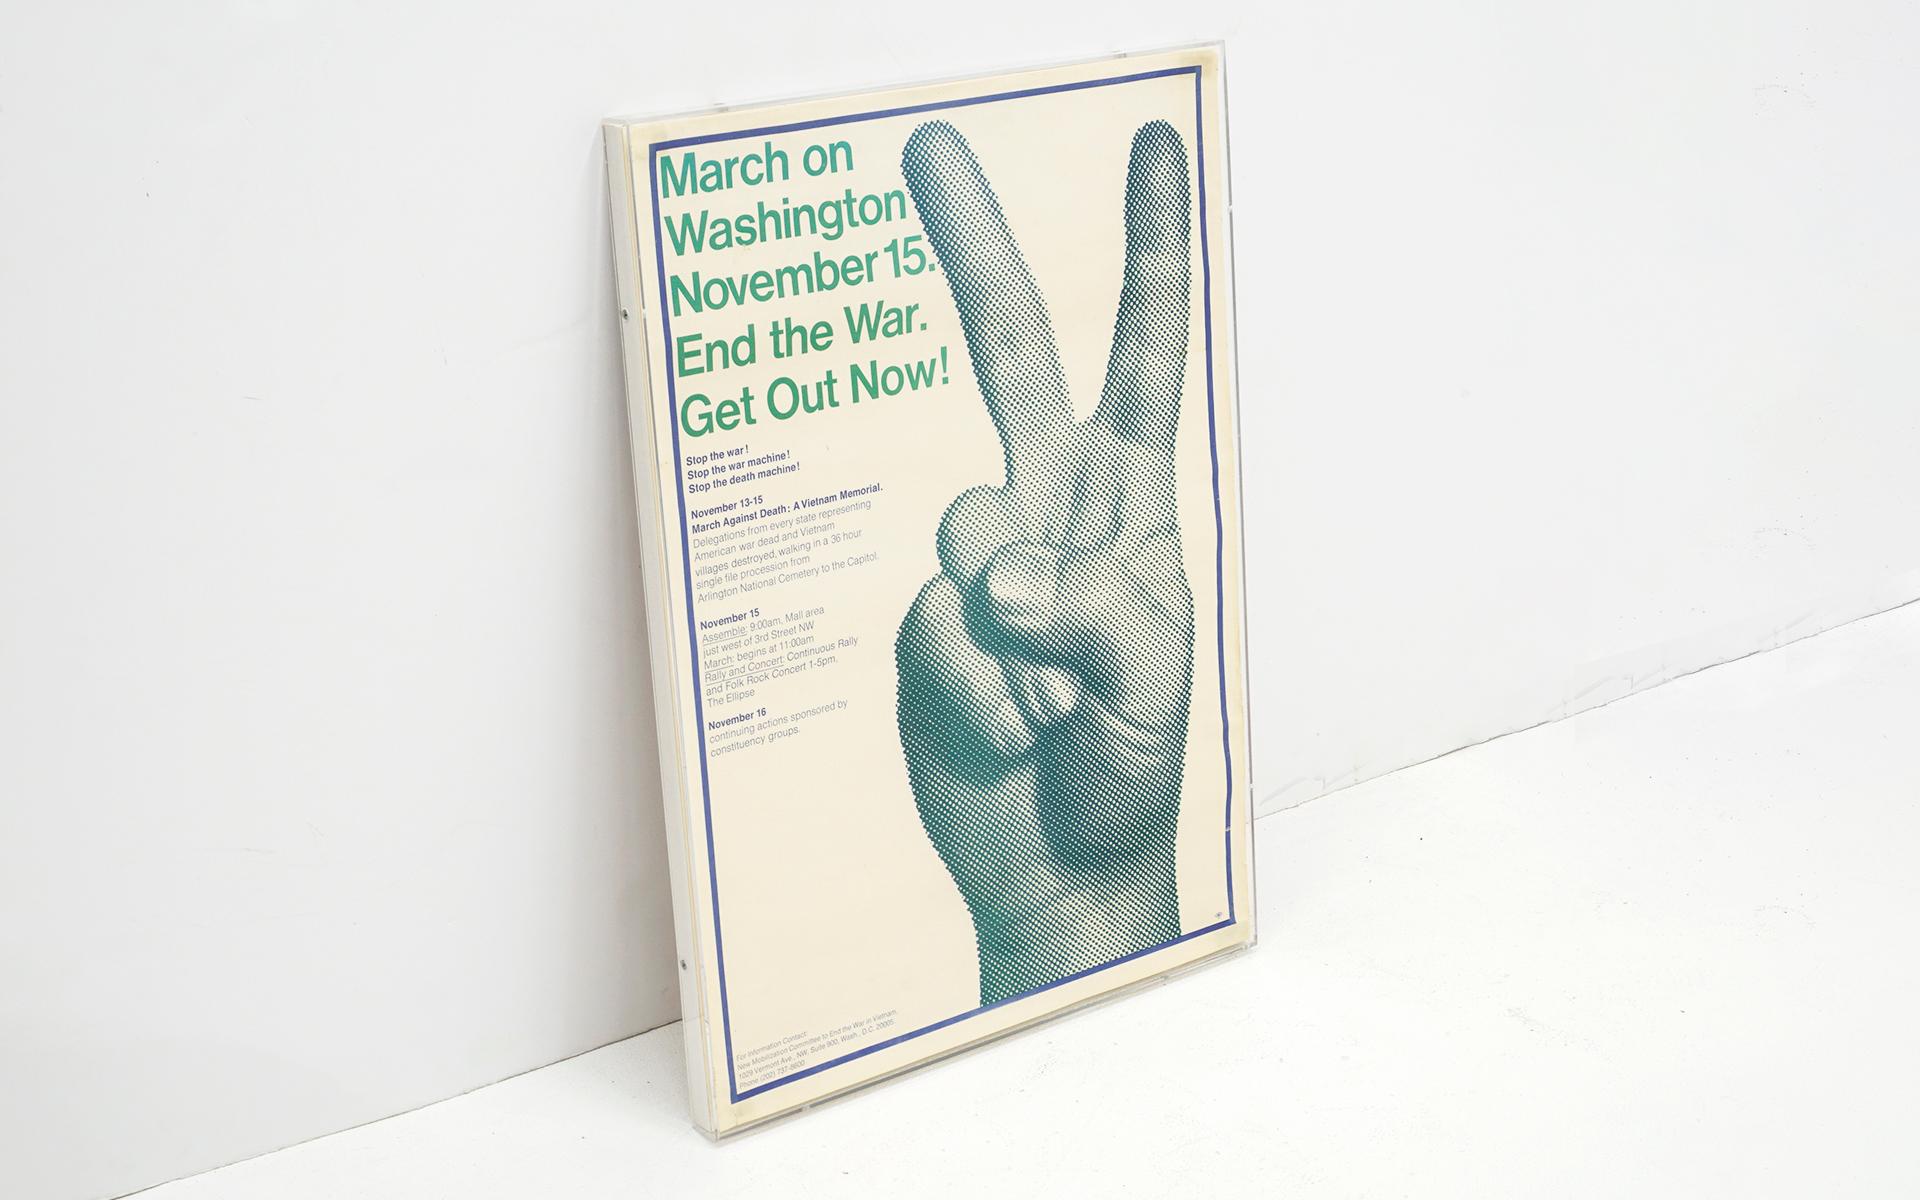 Very rare, original March on Washington Poster protesting the Vietnam war, 1969. The event took place November 13-15 that year. The graphic is a pixilated hand peace sign with details about the event. The poster is in good condition and has not been